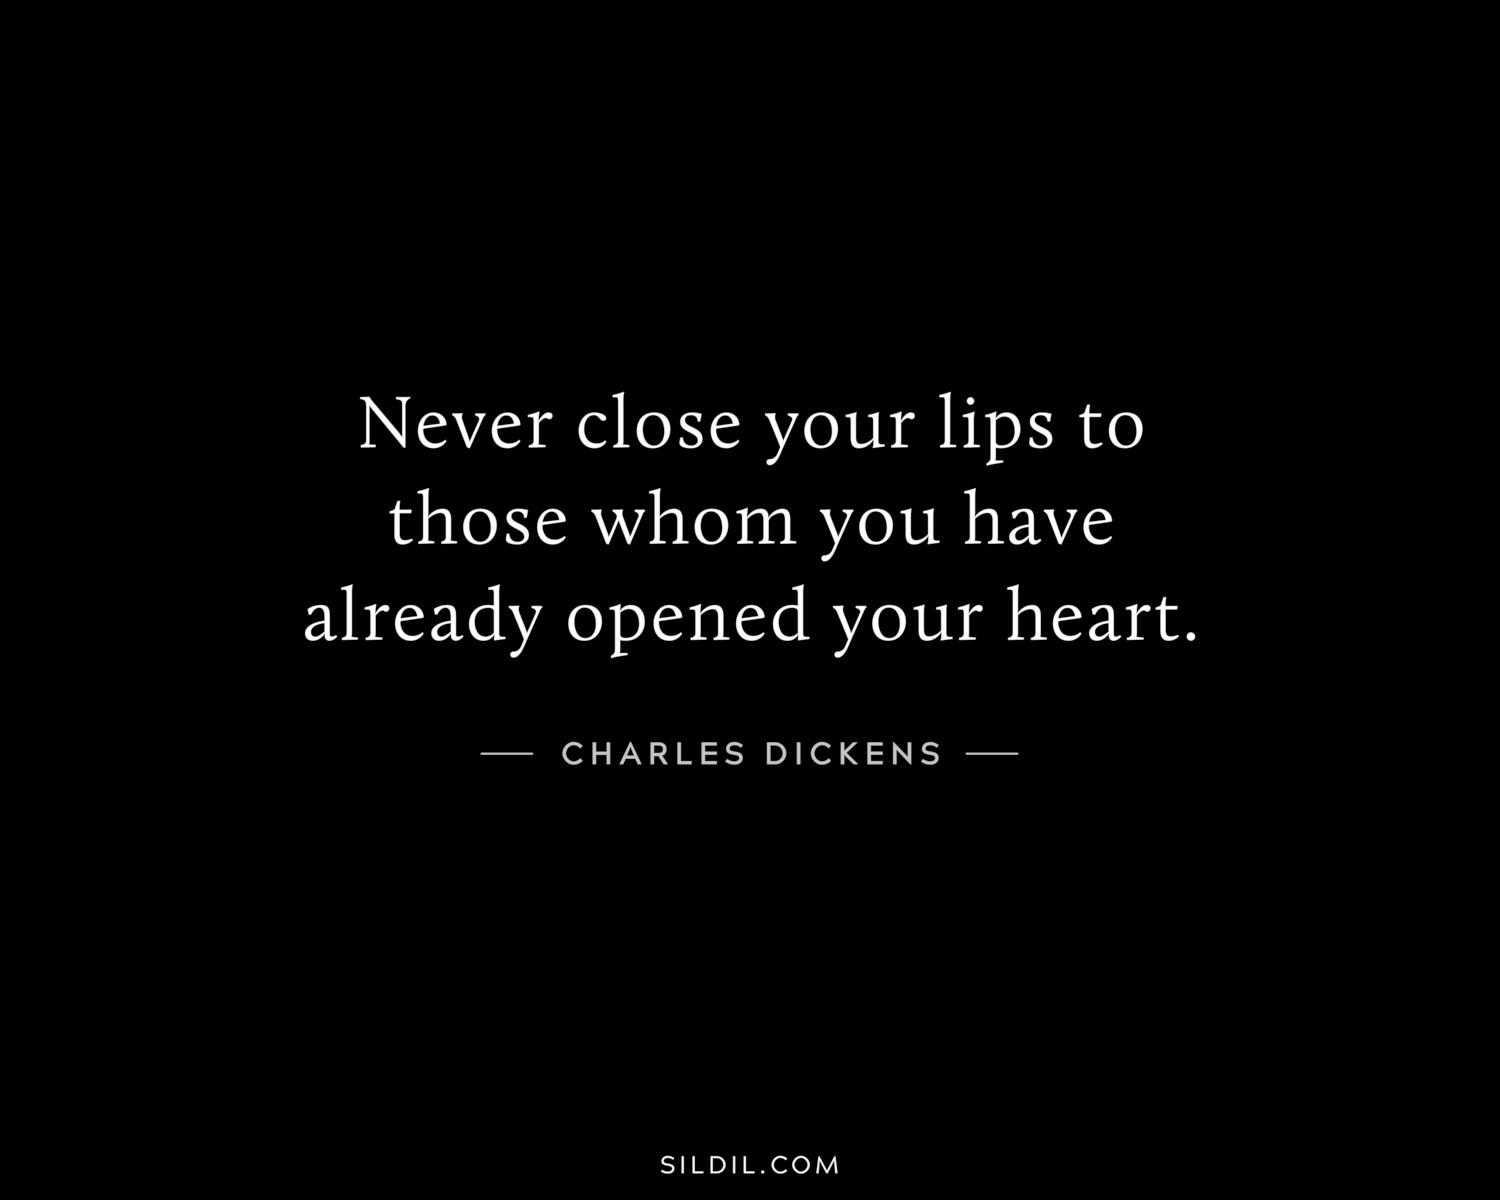 Never close your lips to those whom you have already opened your heart.